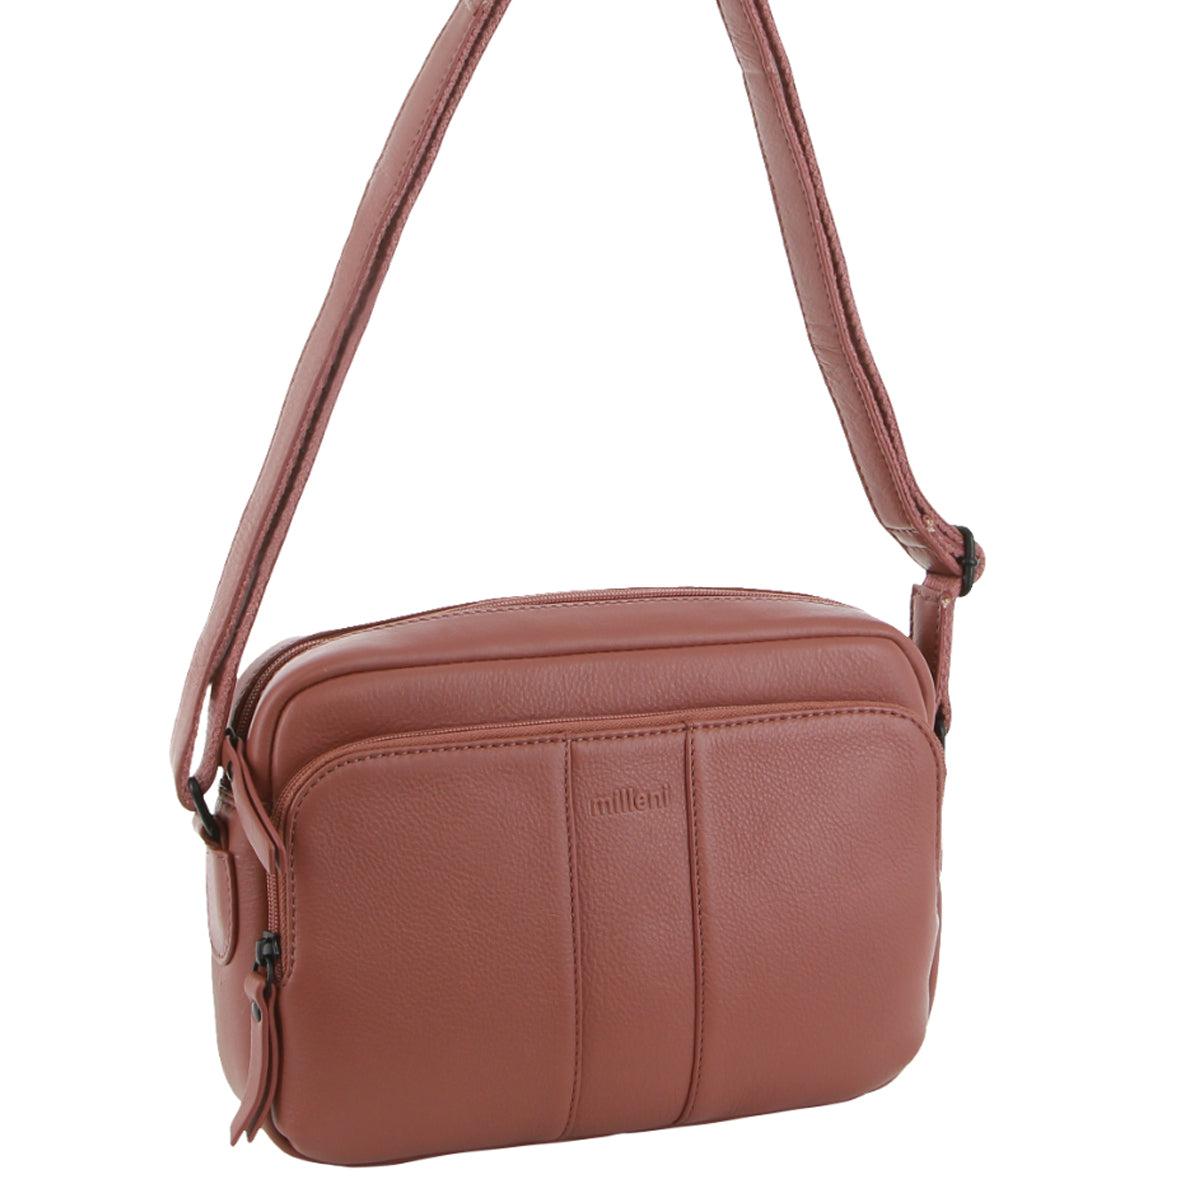 Milleni - NL3871 Small leather sidebag - Rose-2